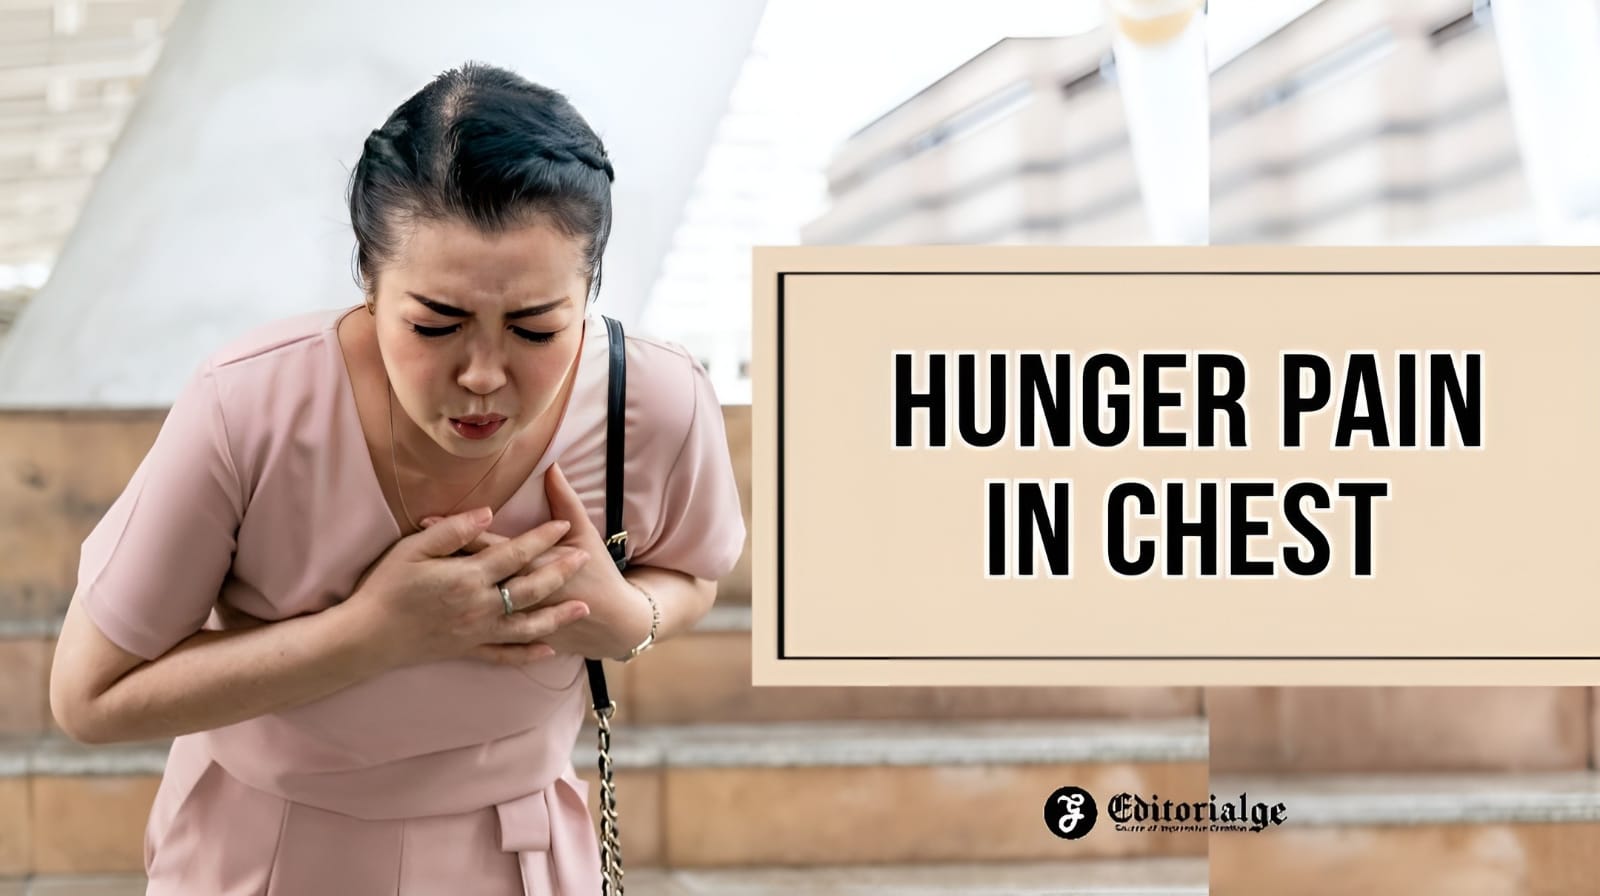 Hunger pain in chest